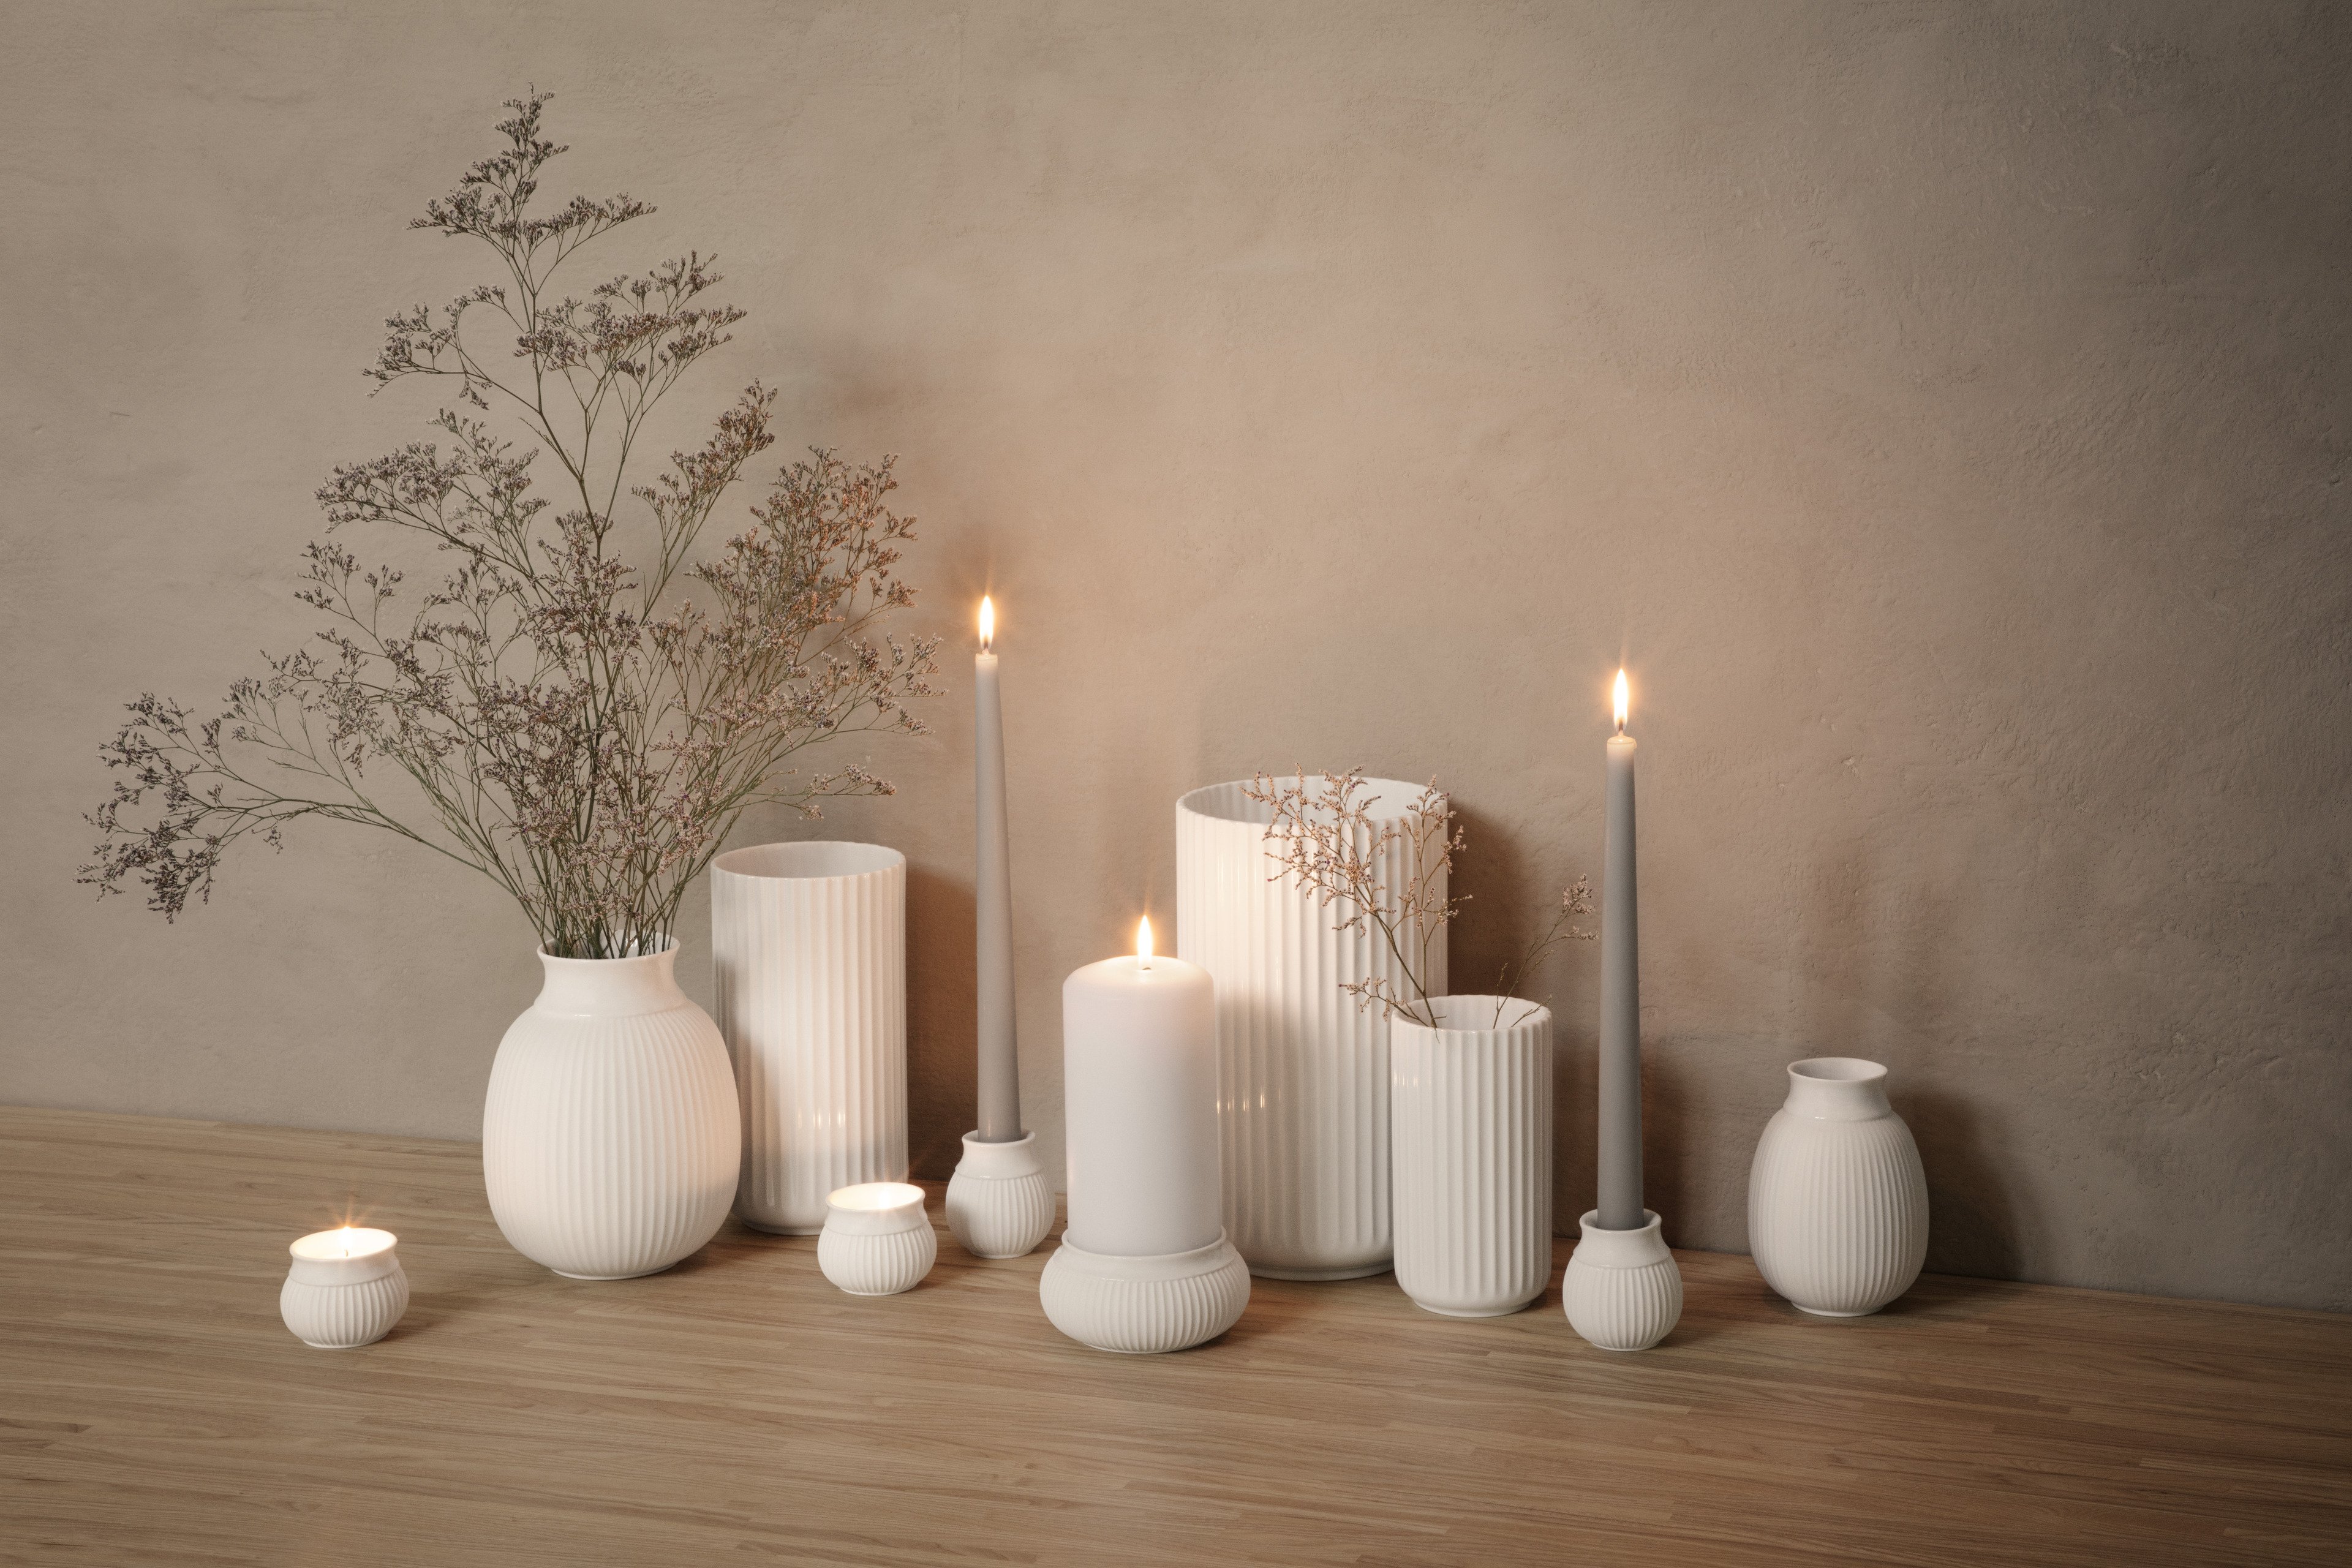 Vases and candlesticks from Lyngby Porcelæn